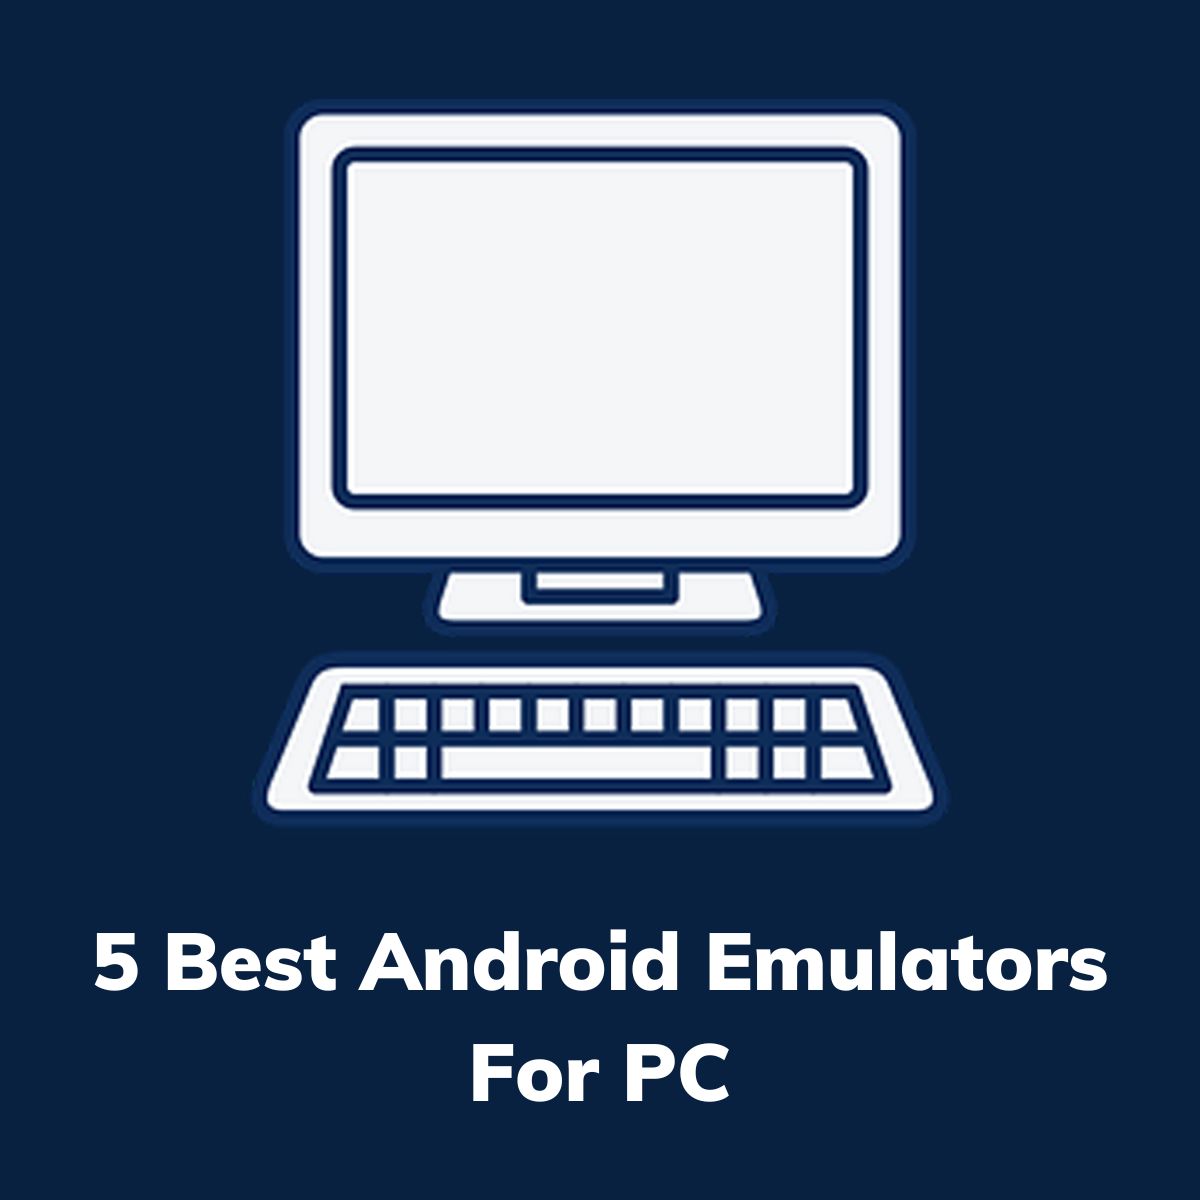 5 Best Android Emulators For PC